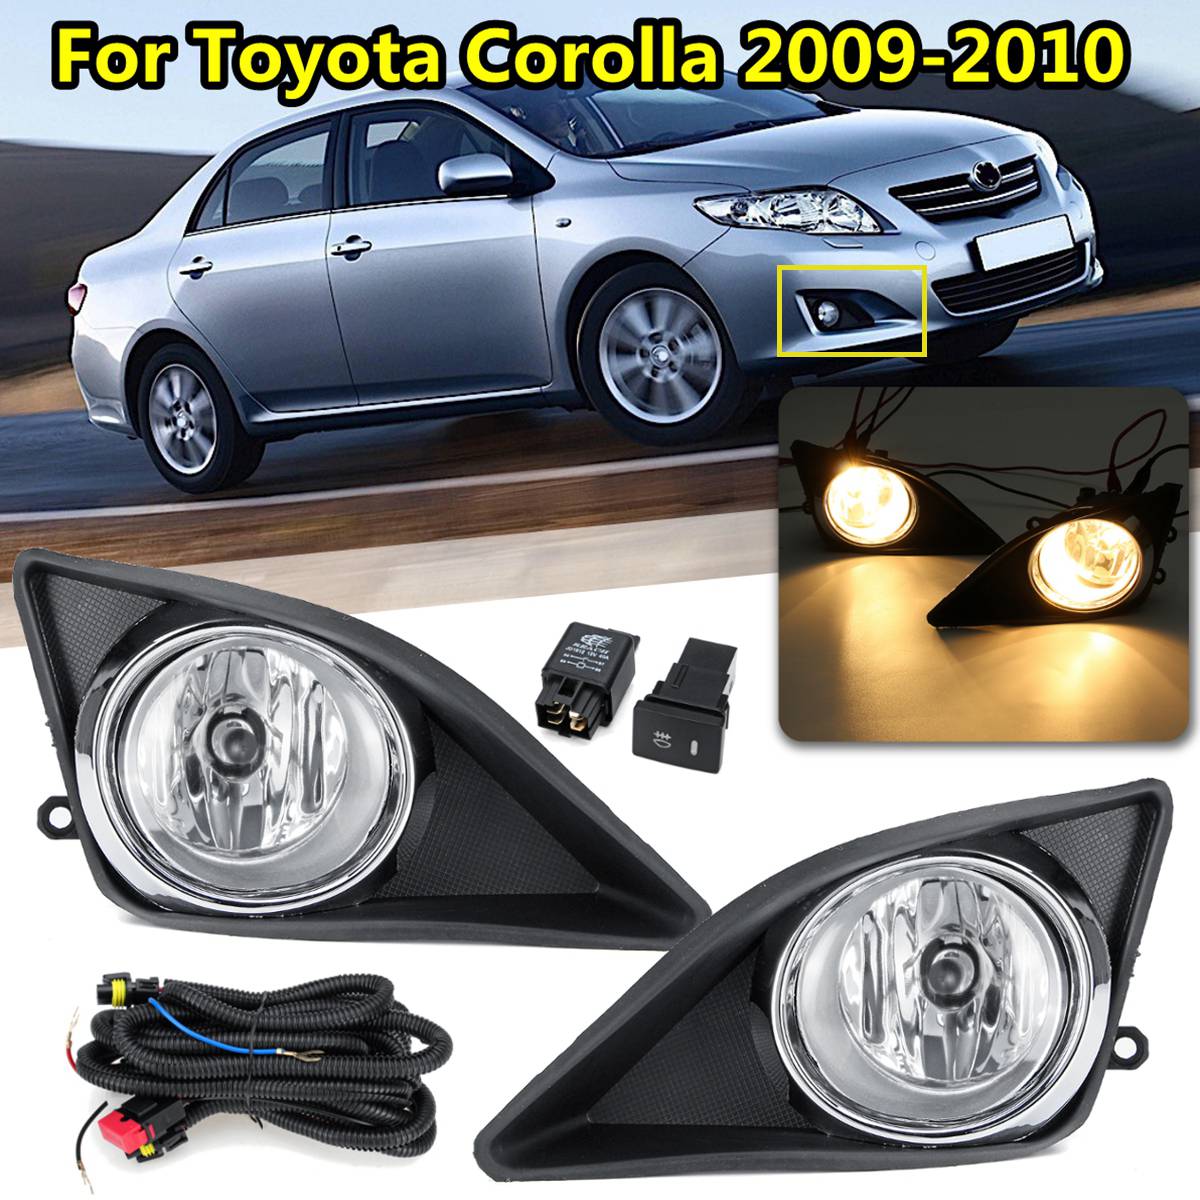 Car-Front-Bumper-Fog-Lights-Assembly-with-H11-Bulbs-Amber-Pair-for-Toyota-Corolla-2009-2010-1406101